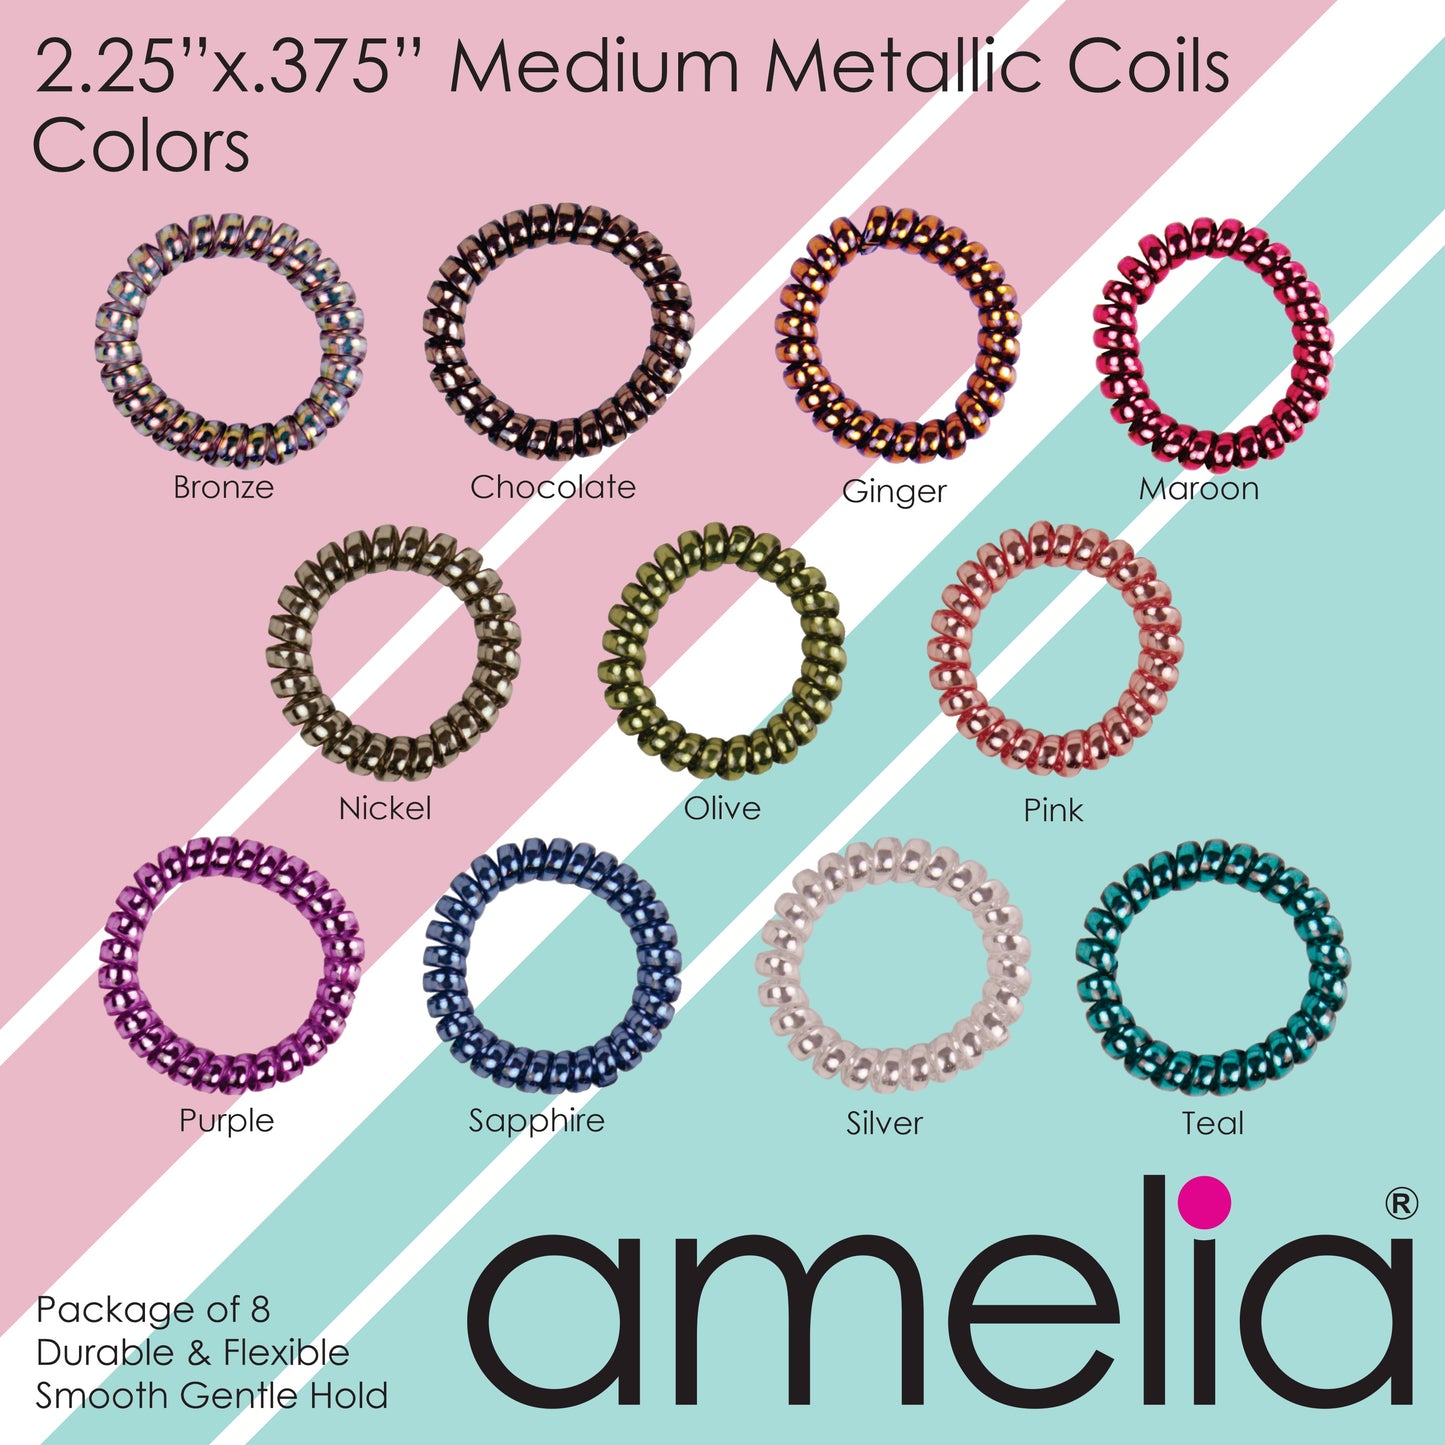 Amelia Beauty Products 8 Medium Smooth Elastic Hair Coils, 2.25in Diameter Spiral Hair Ties, Gentle on Hair, Strong Hold and Minimizes Dents and Creases, Nickel